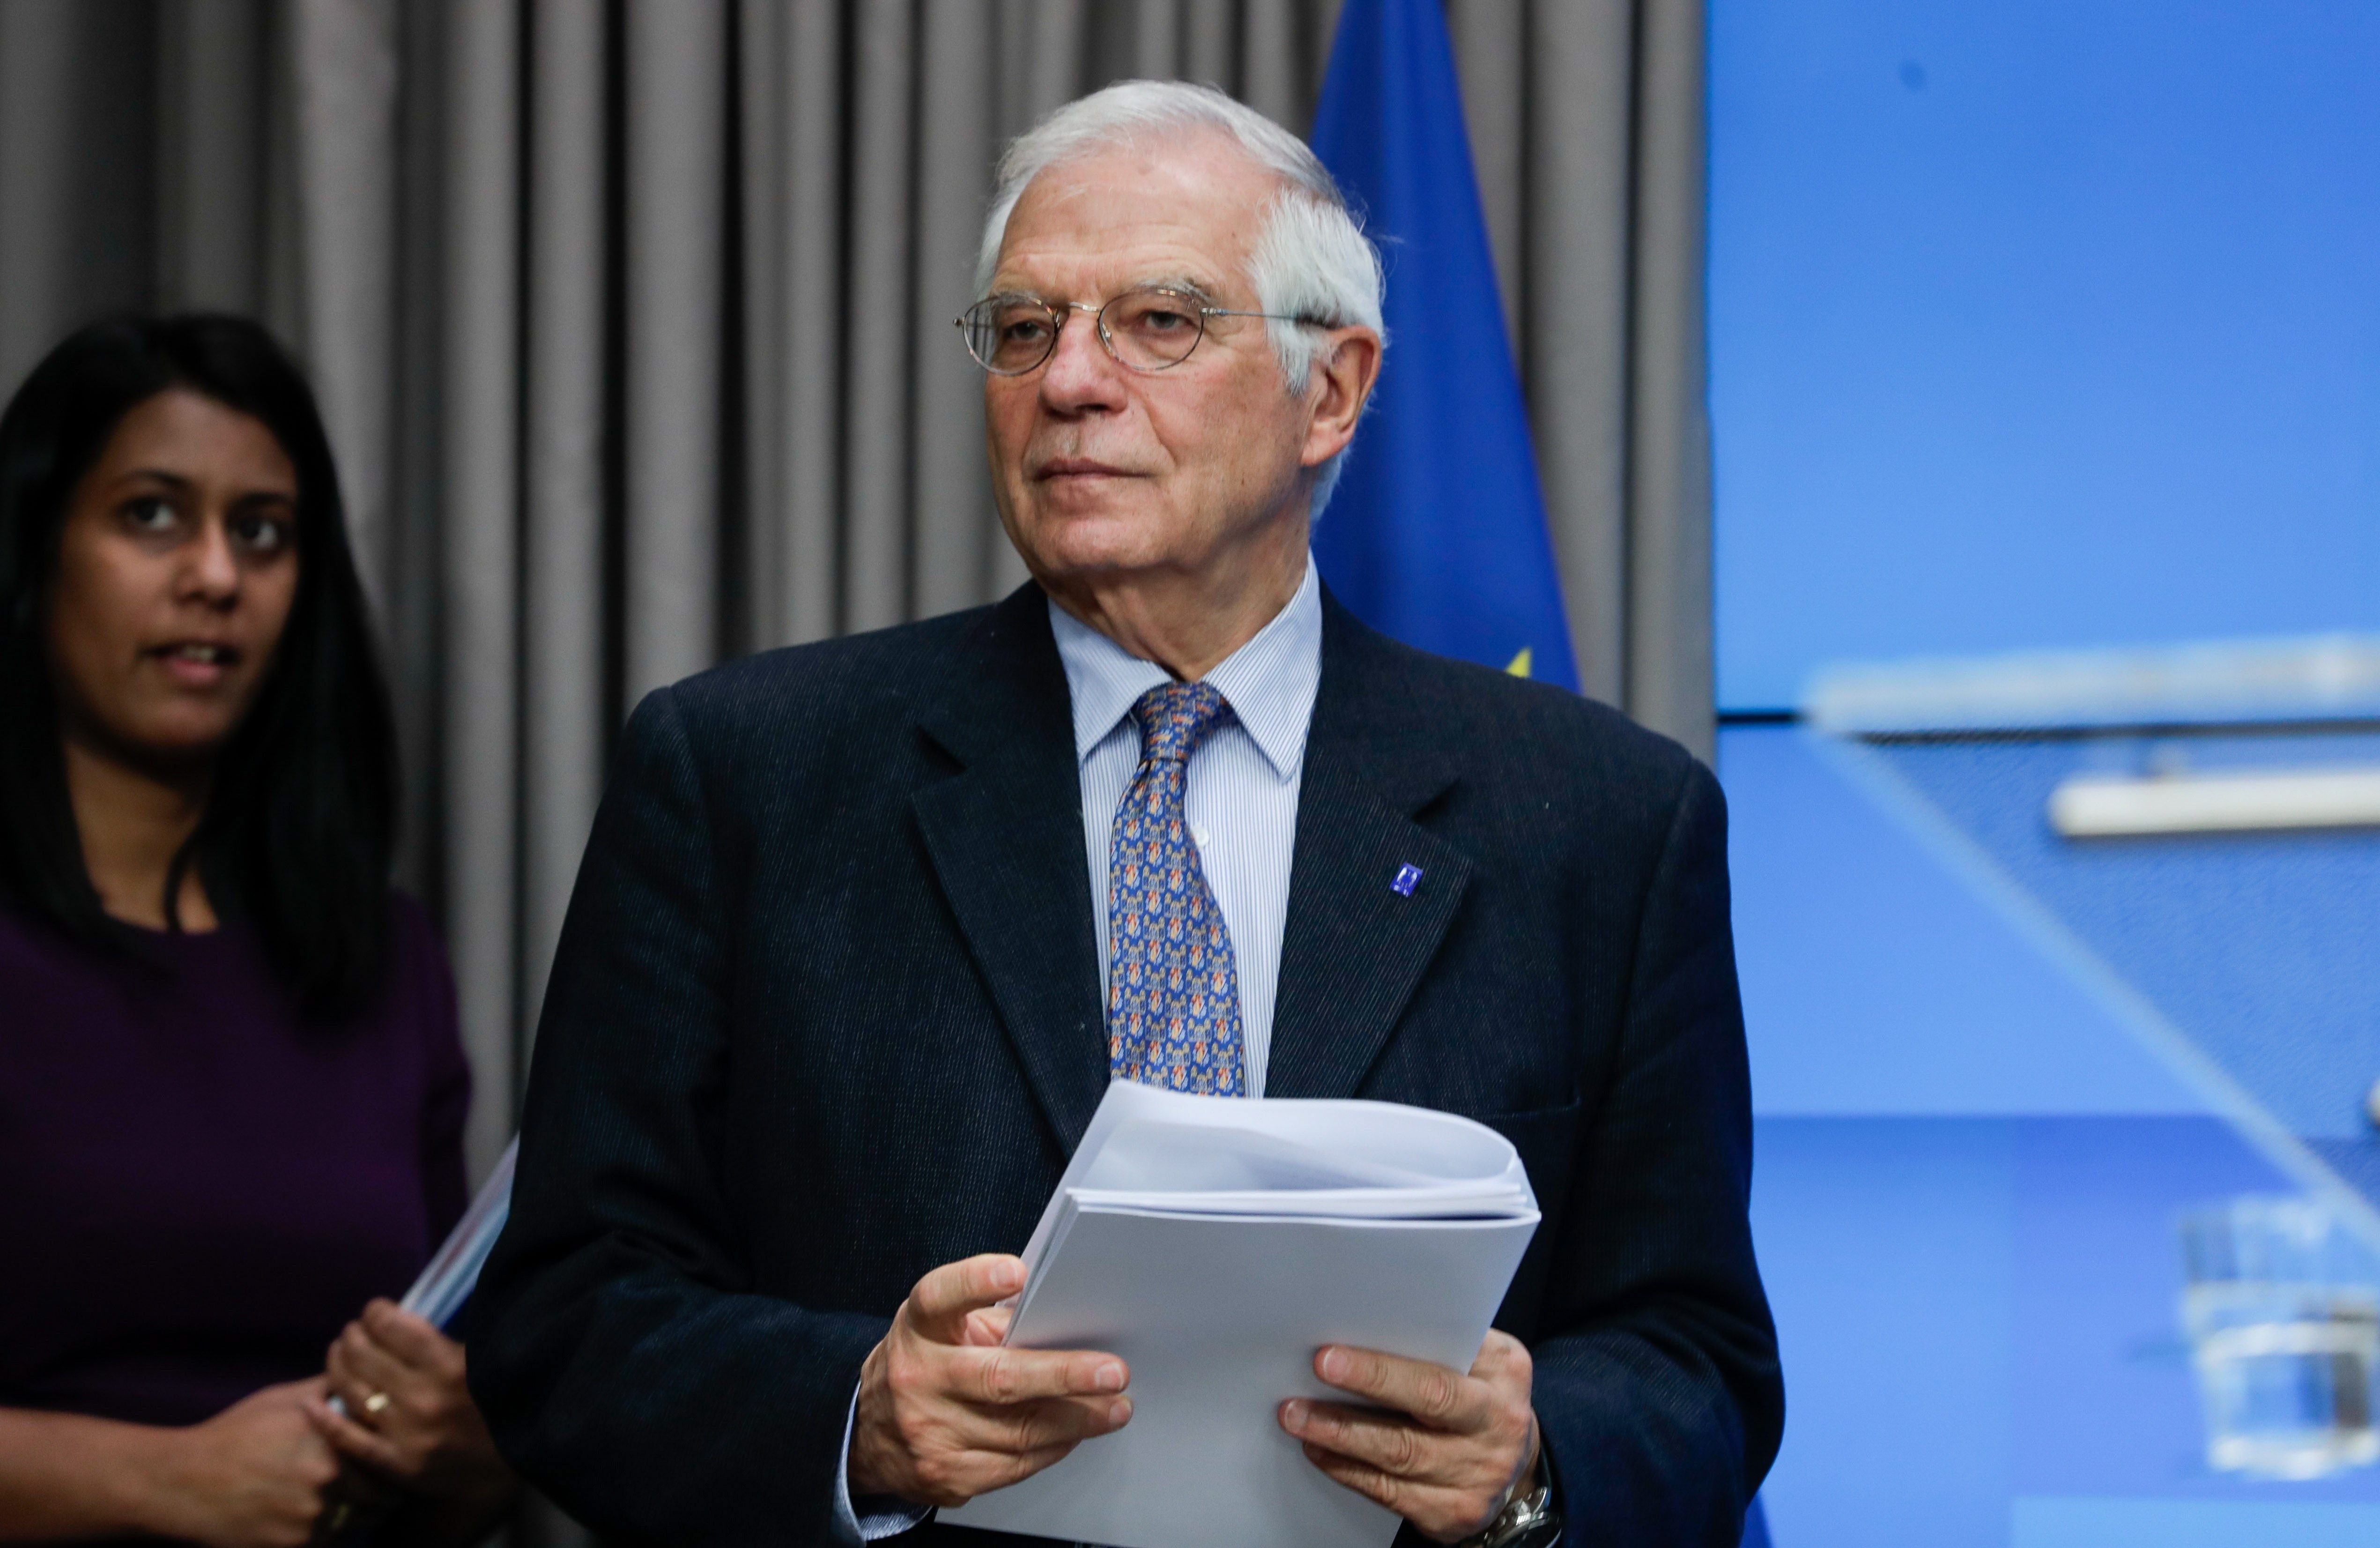 European Commission distances itself from Borrell